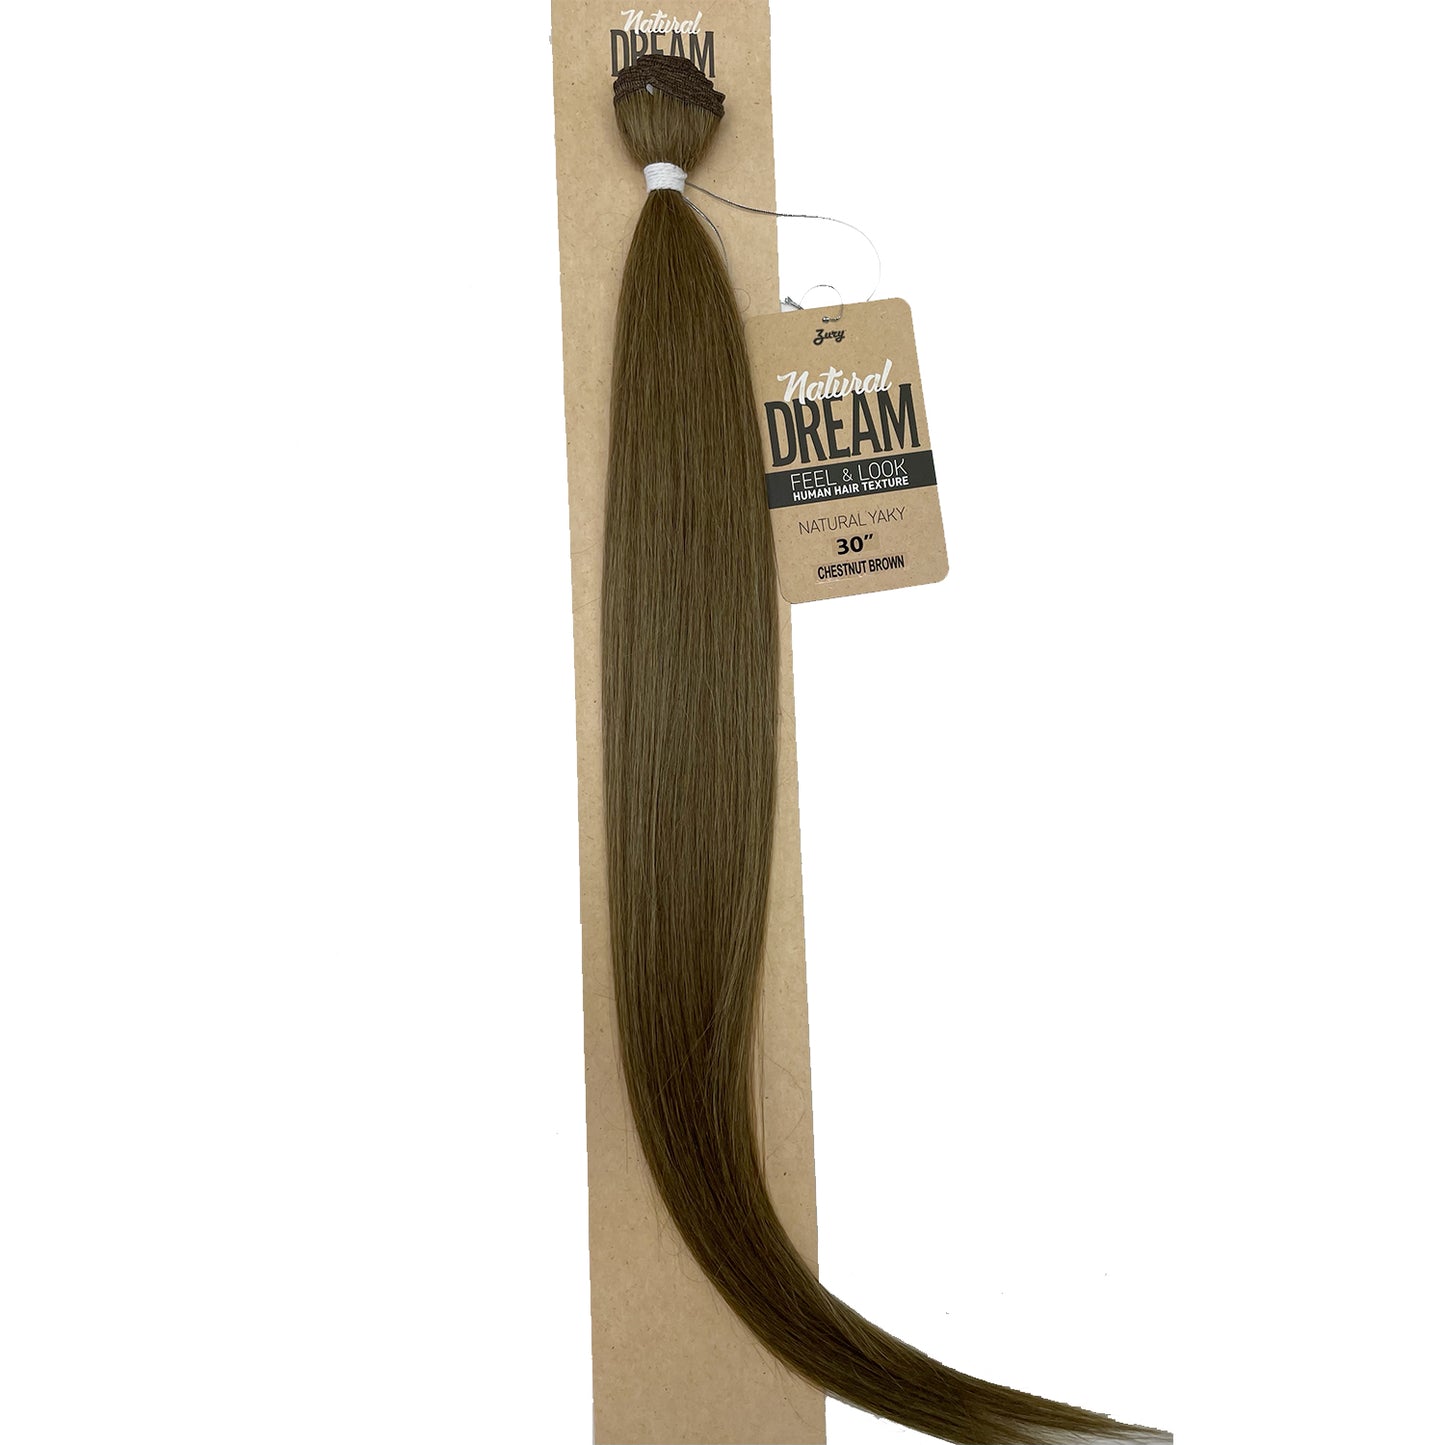 Zury Natural Dream Feel & Look Hair Extension Bundle, Natural Yaky 30" brown chestnut